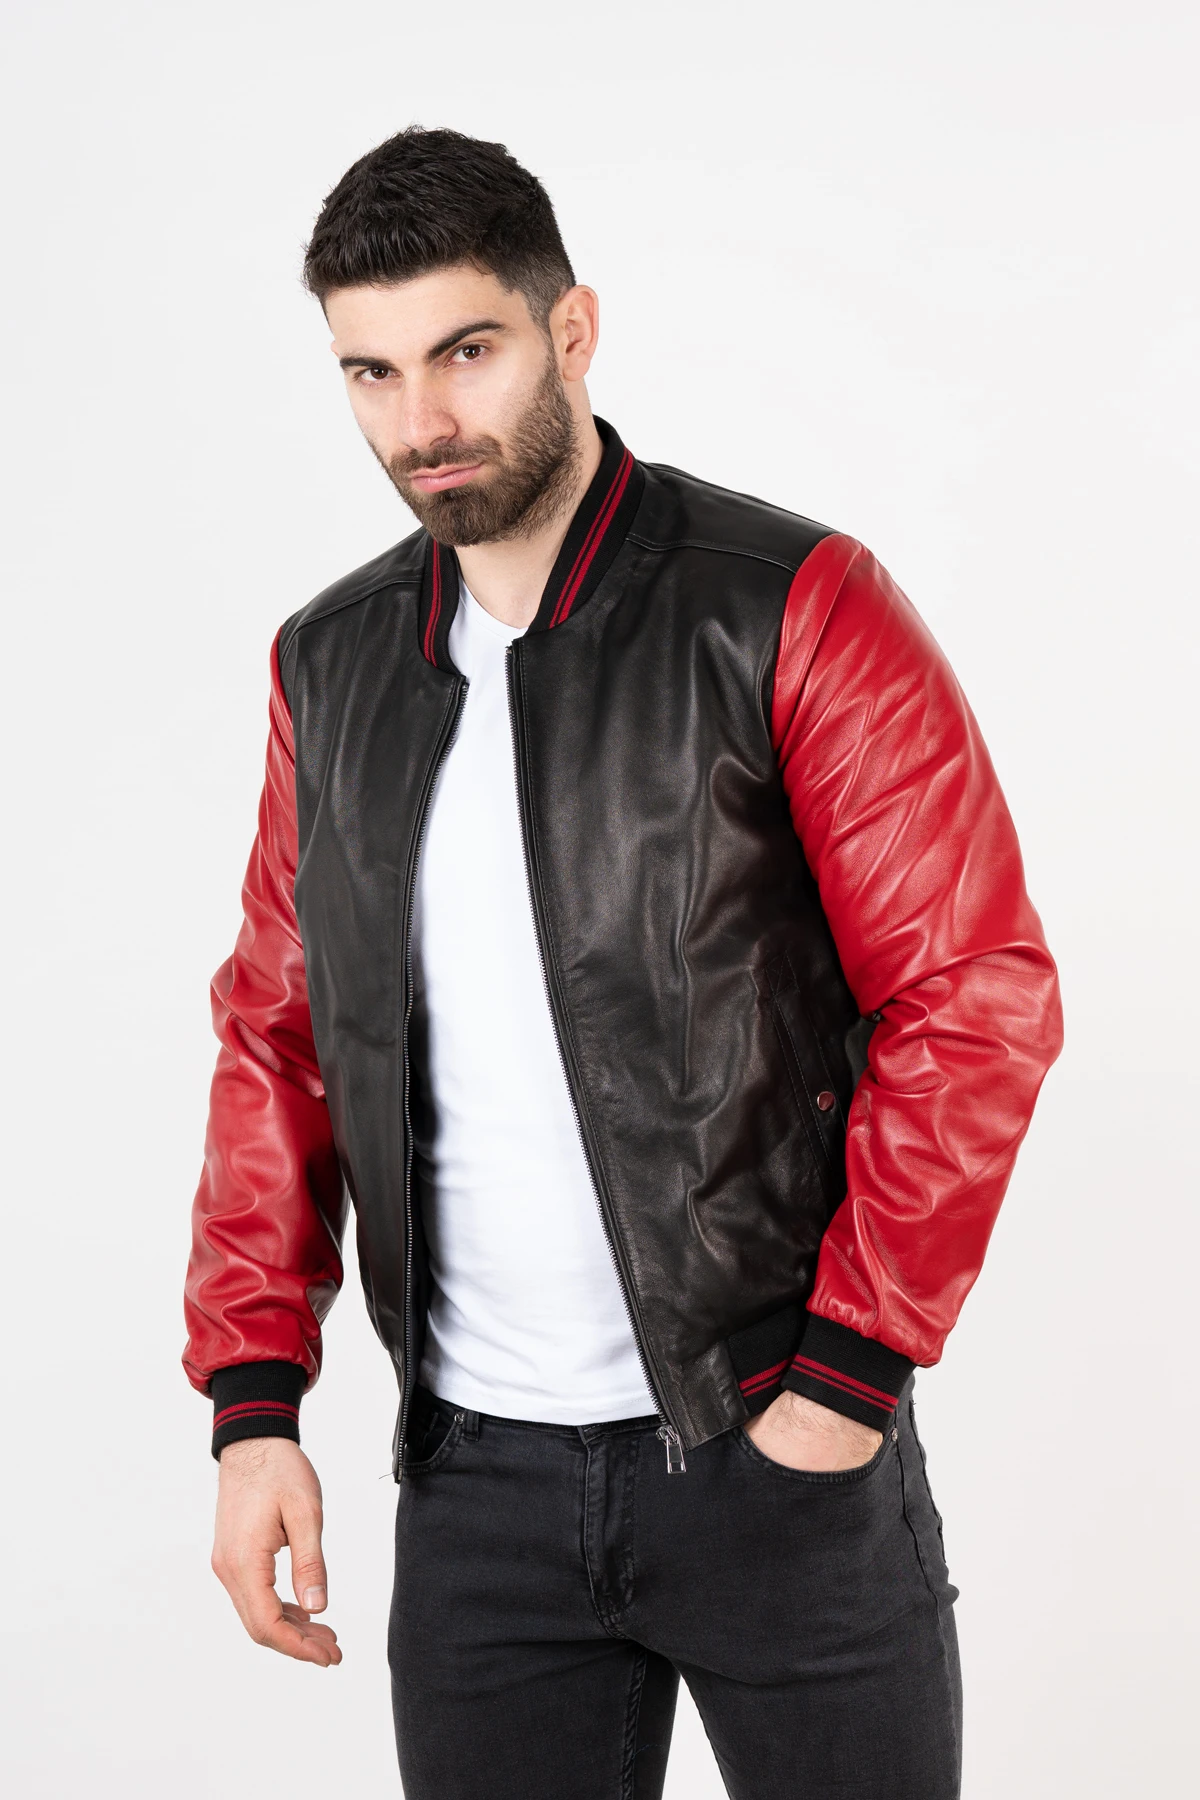 

Mens Genuine Leather Jacket Quality Sport Flight Clothes A2 Red Moto Biker Natural Sheepskin Bomber Coats Outerwear 2021spring